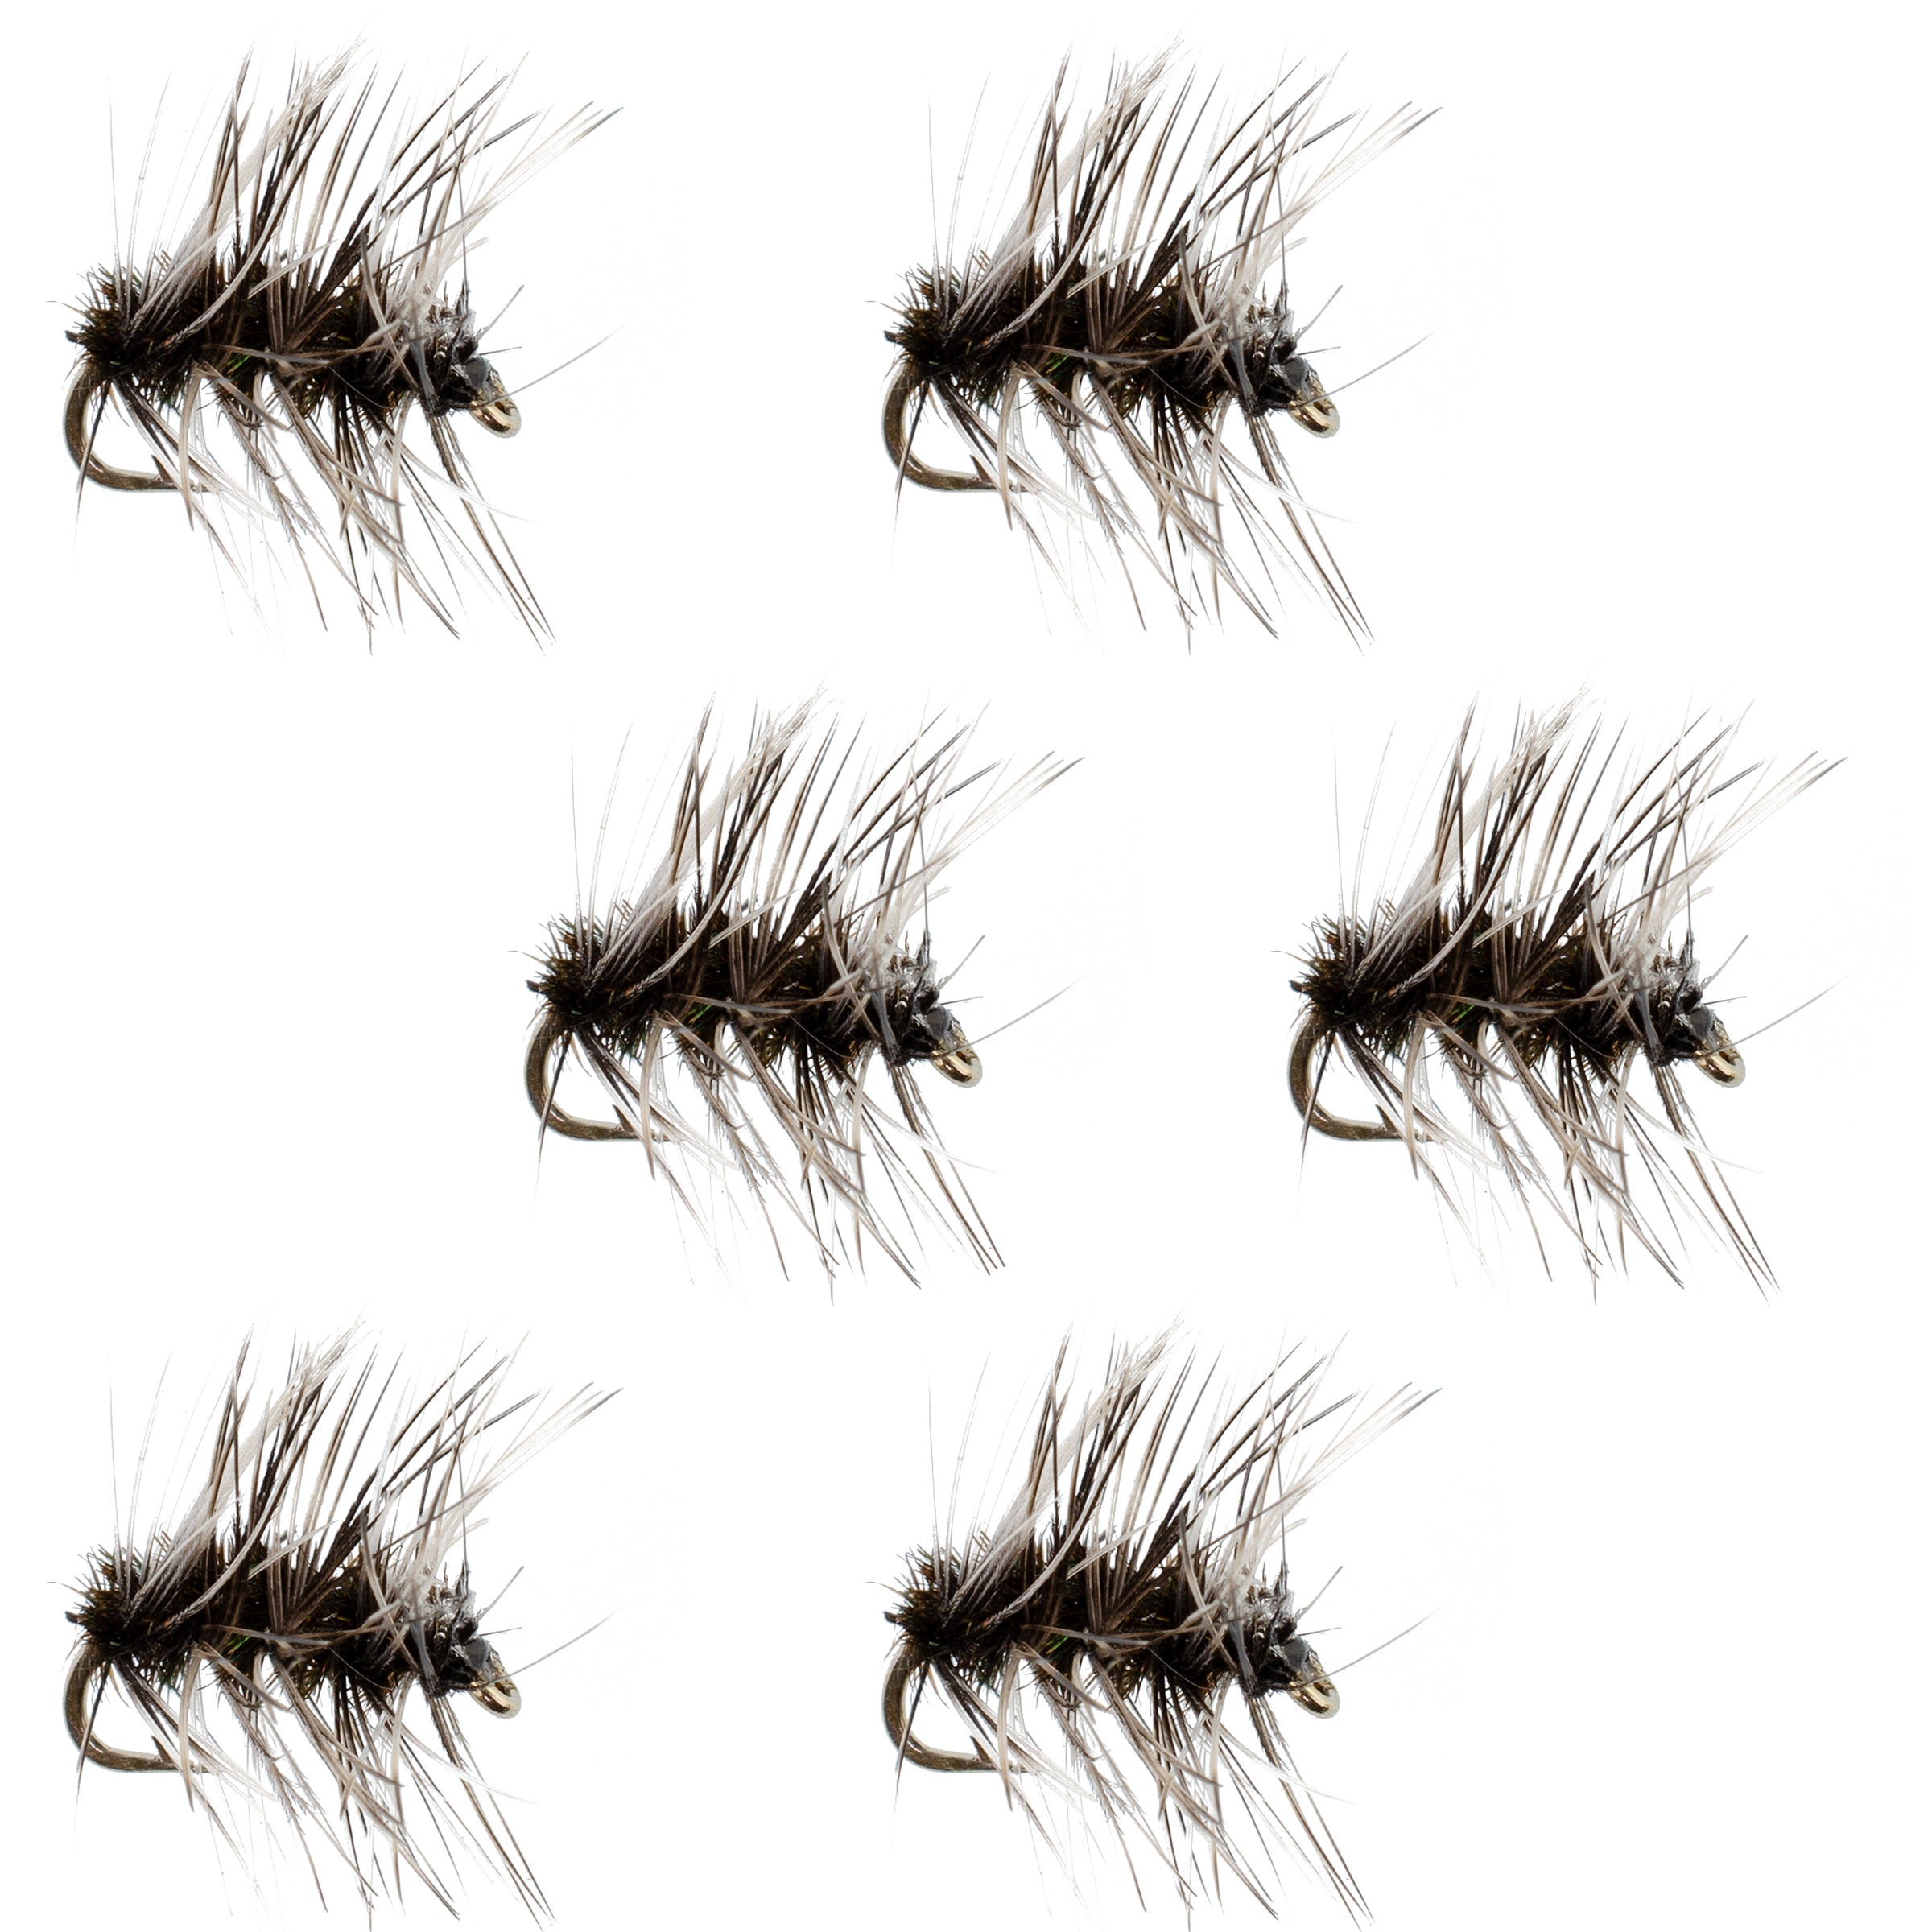 Griffiths Gnat Midge Trout Dry Fly Fishing Flies - 6 Flies Size 18